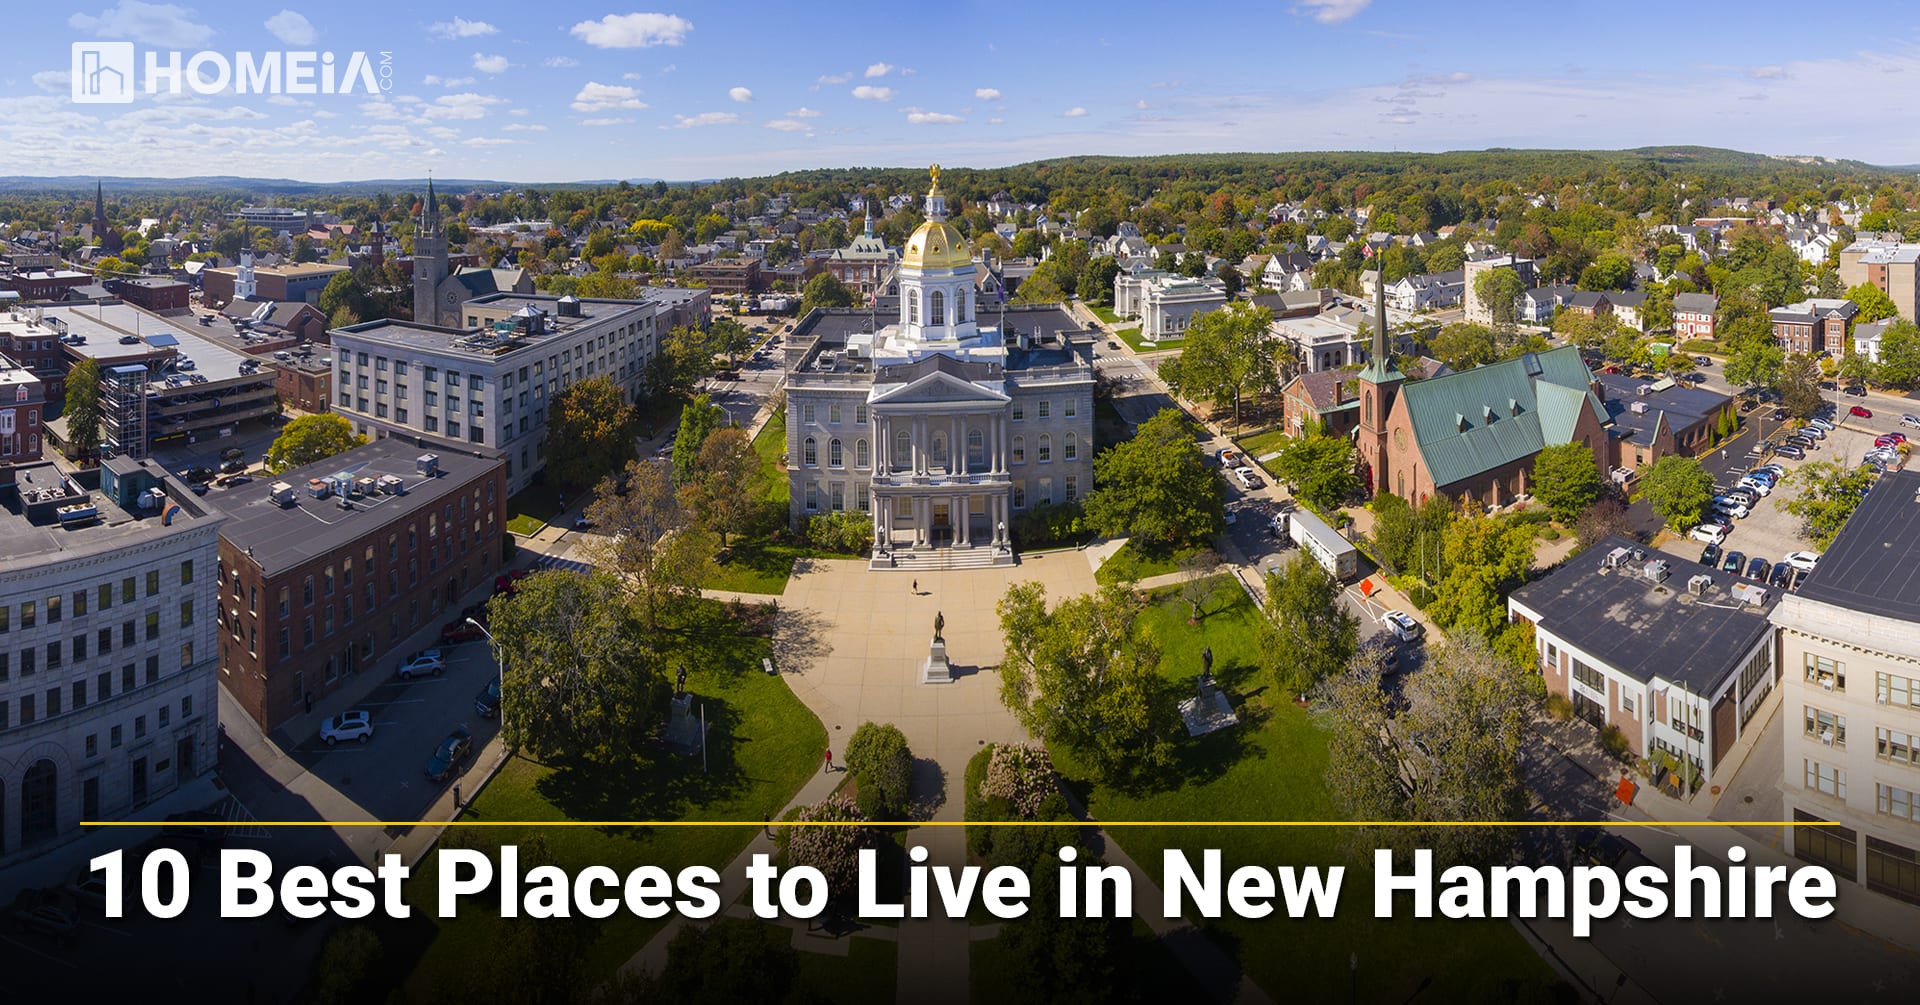 The 10 Best Places to Live in New Hampshire